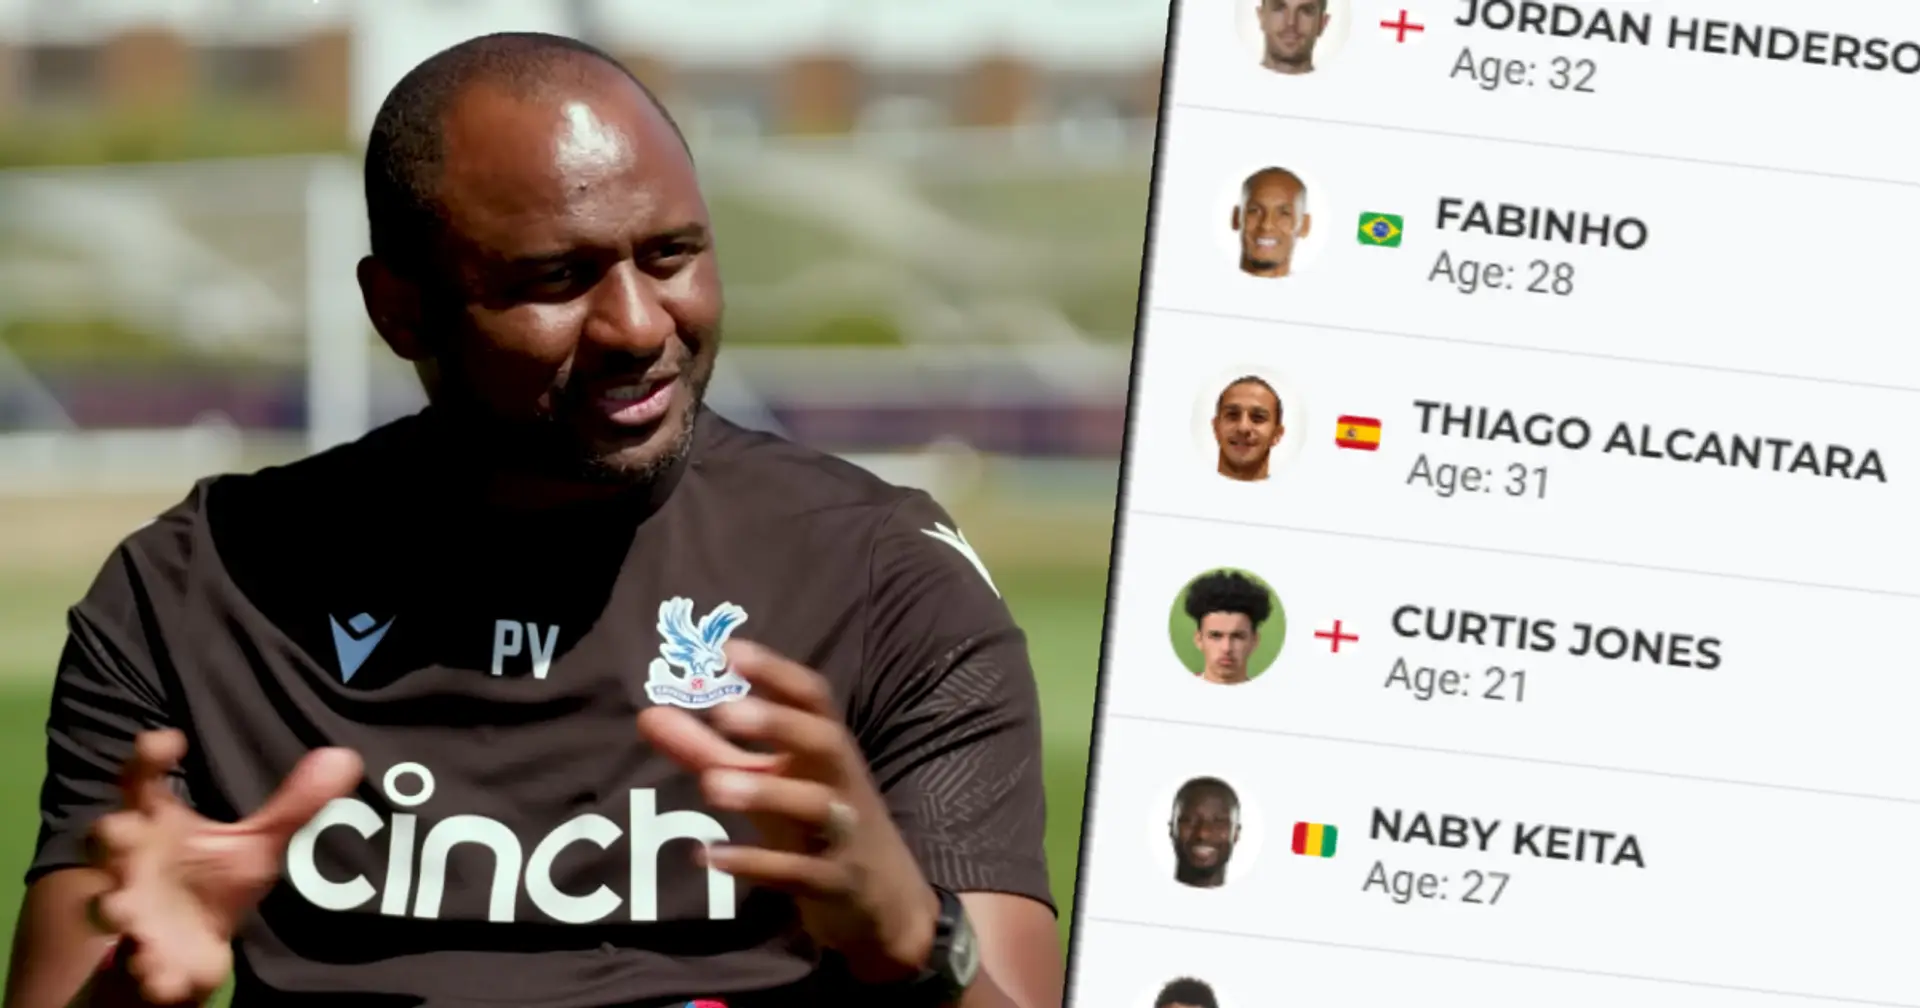 Patrick Vieira names 3 players most similar to him as a player – one plays at Liverpool